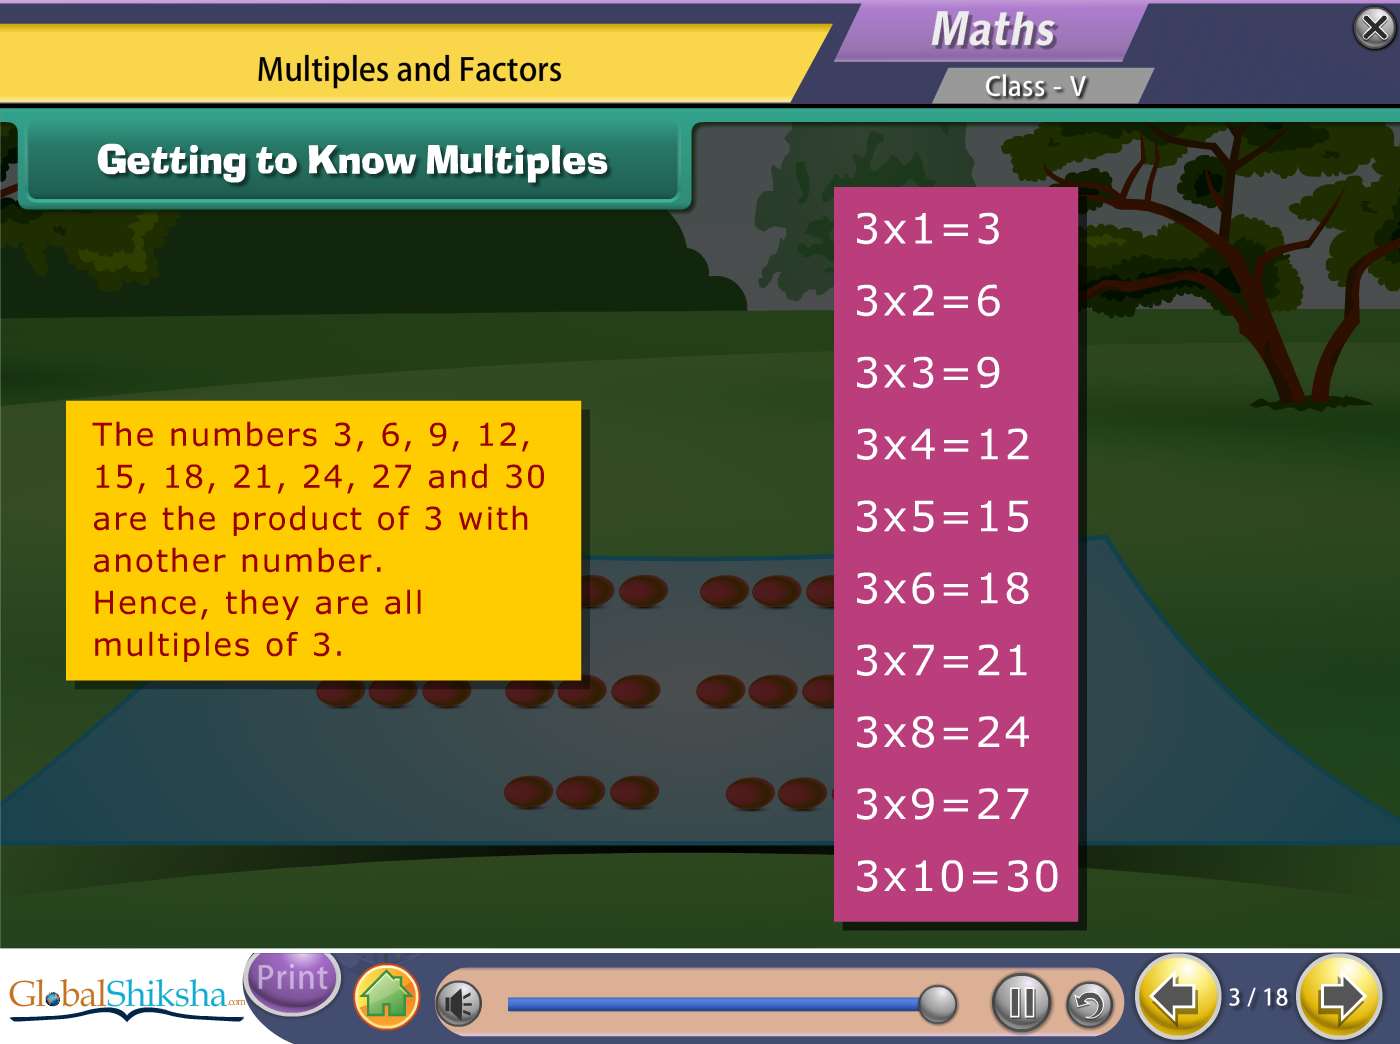 NCERT Class 5 Maths and Science Animated Pendrive in English